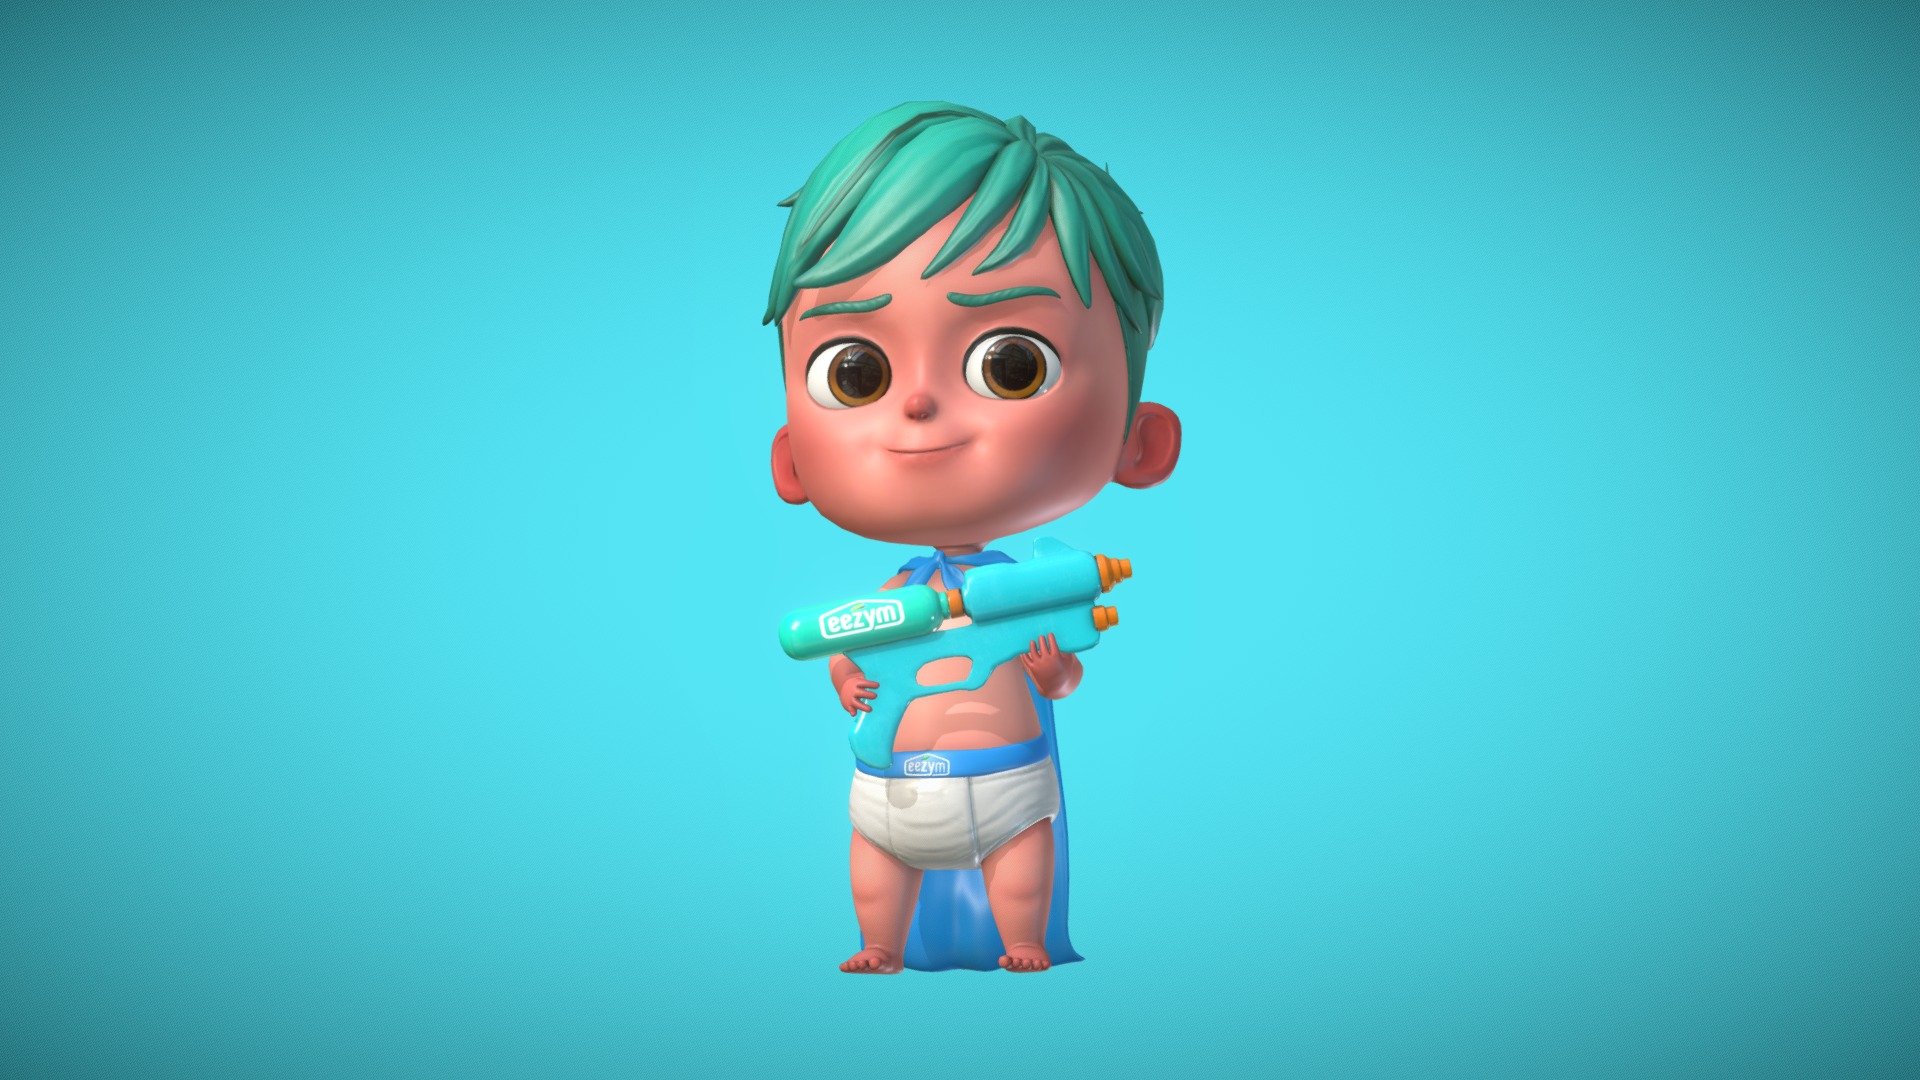 Here's a fun character I designed for client as a mascot.
I tried to use as much inspiration from Pixar and Disney styles as I could.
The Super Baby was one of the first characters I did using the comlete game art pipeline, and it taught me a great deal! - Super Baby - 3D model by braianlc 3d model